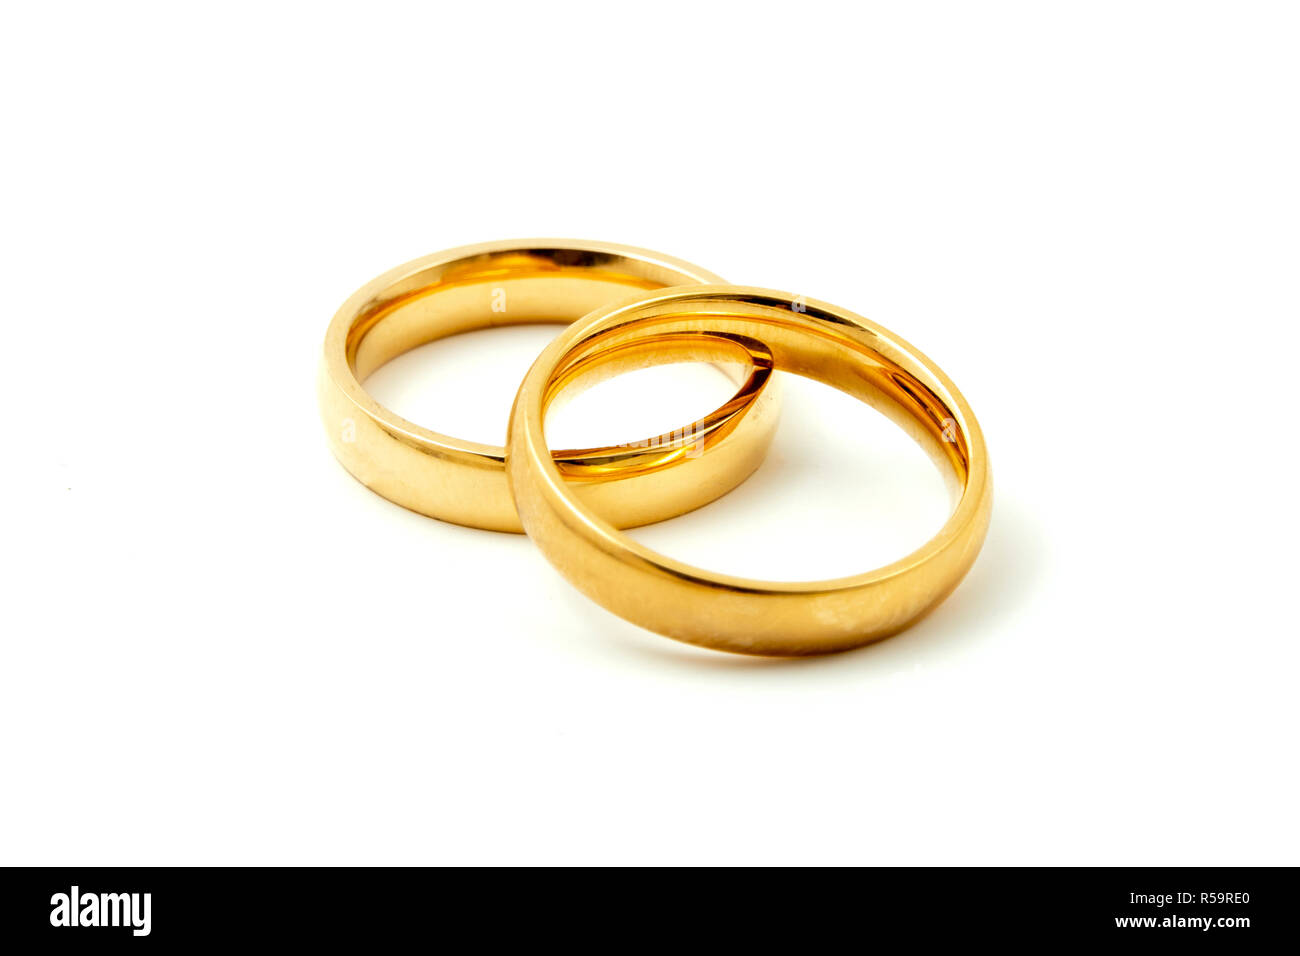 Wedding rings on a white background Stock Photo